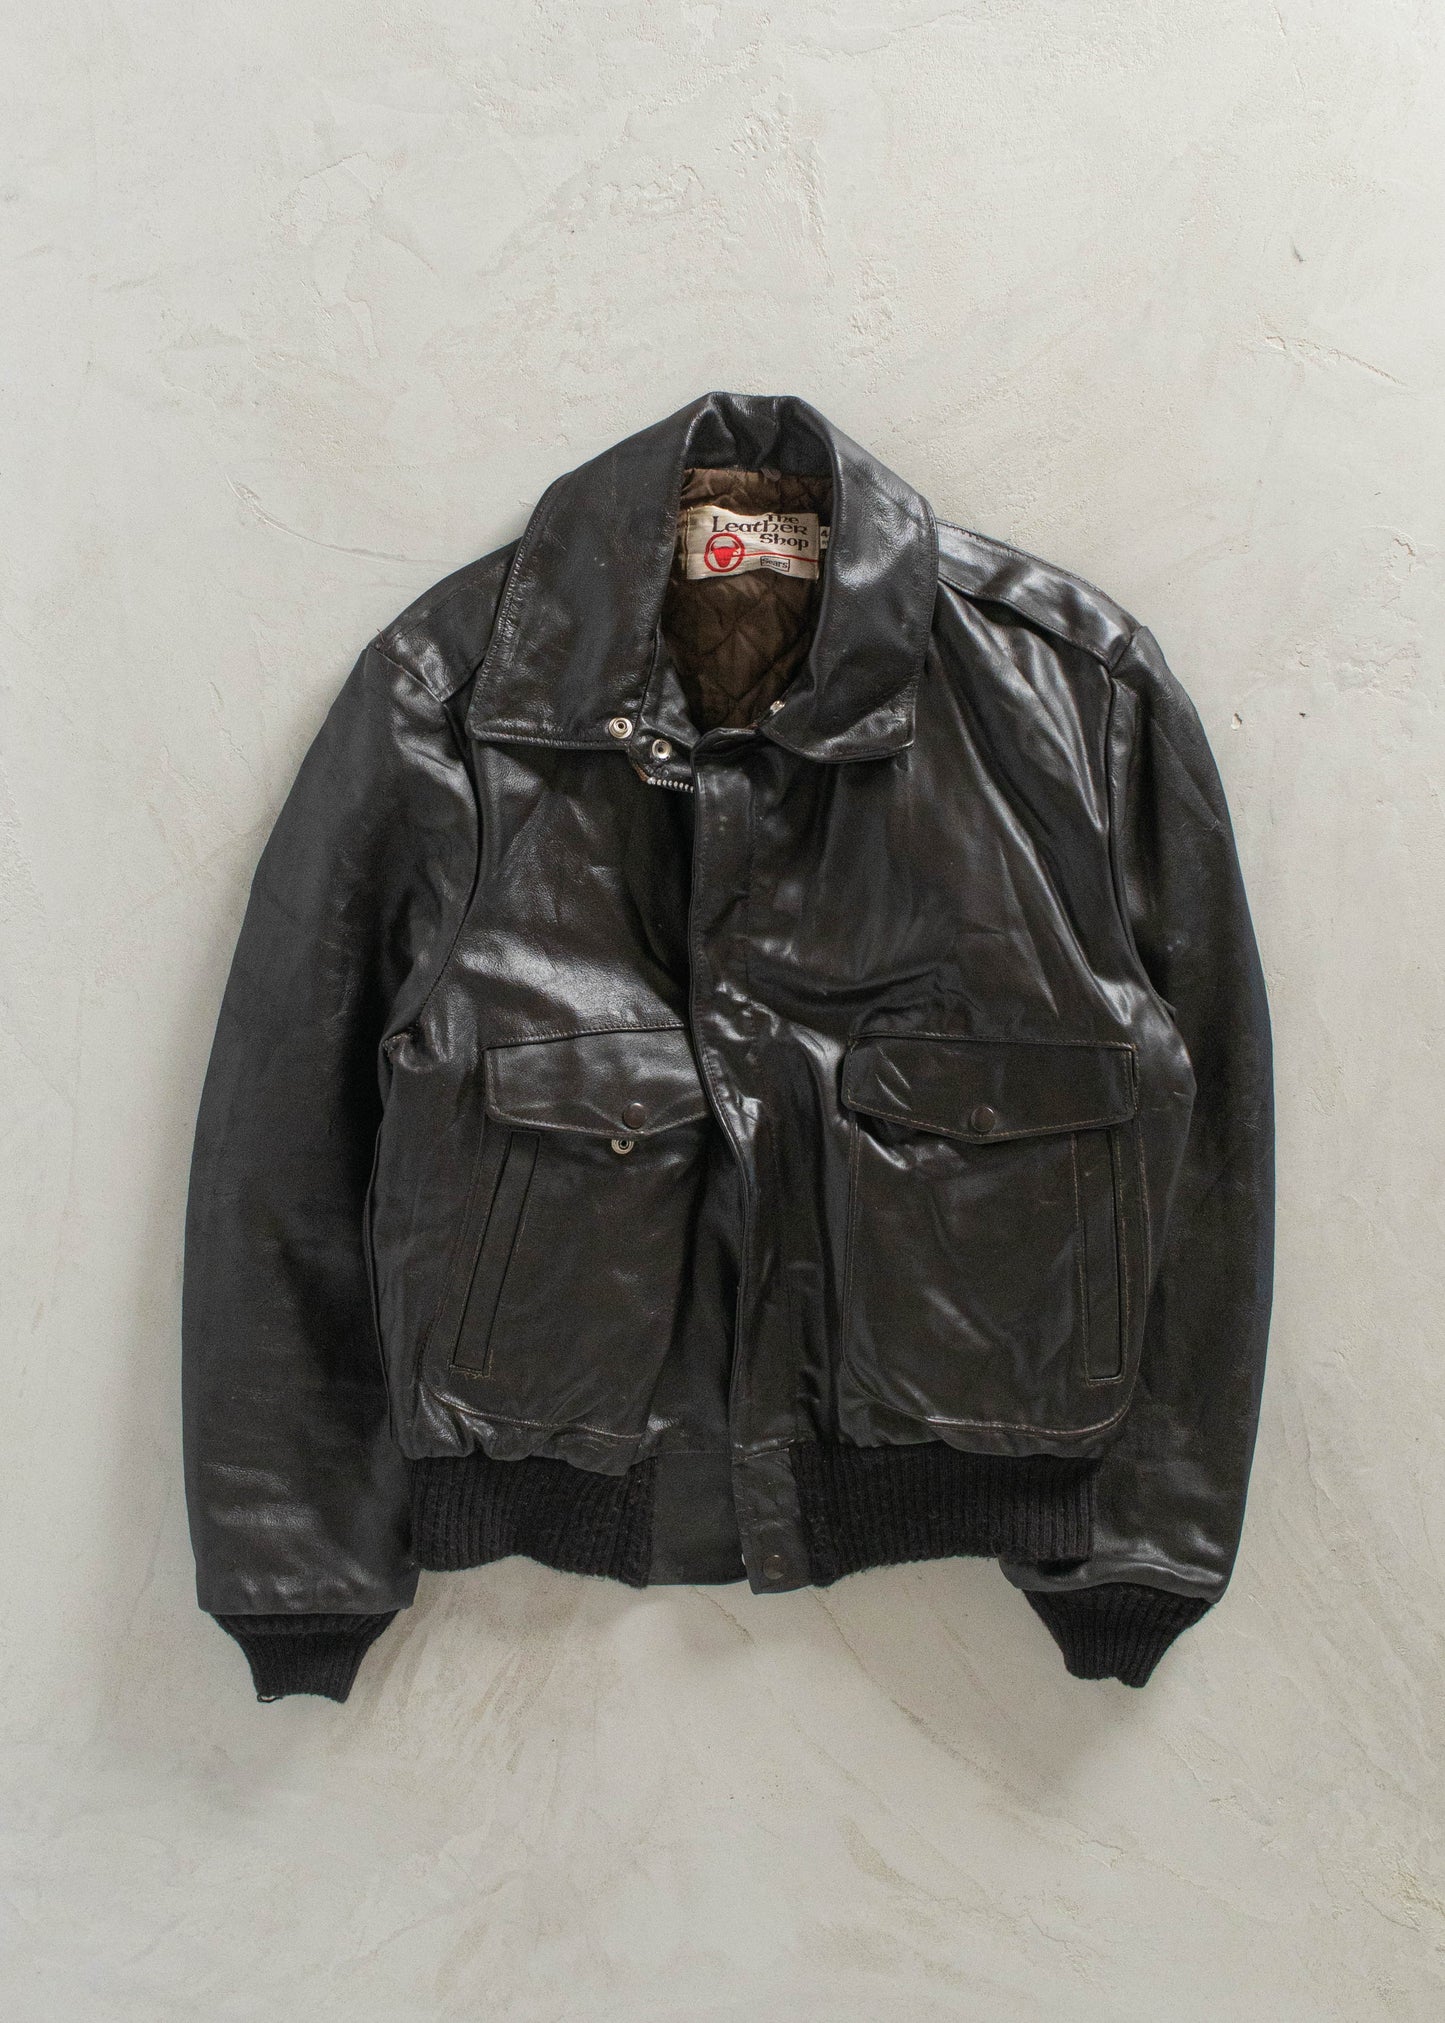 1980s Sears The Leather Shop Bomber Jacket Size L/XL